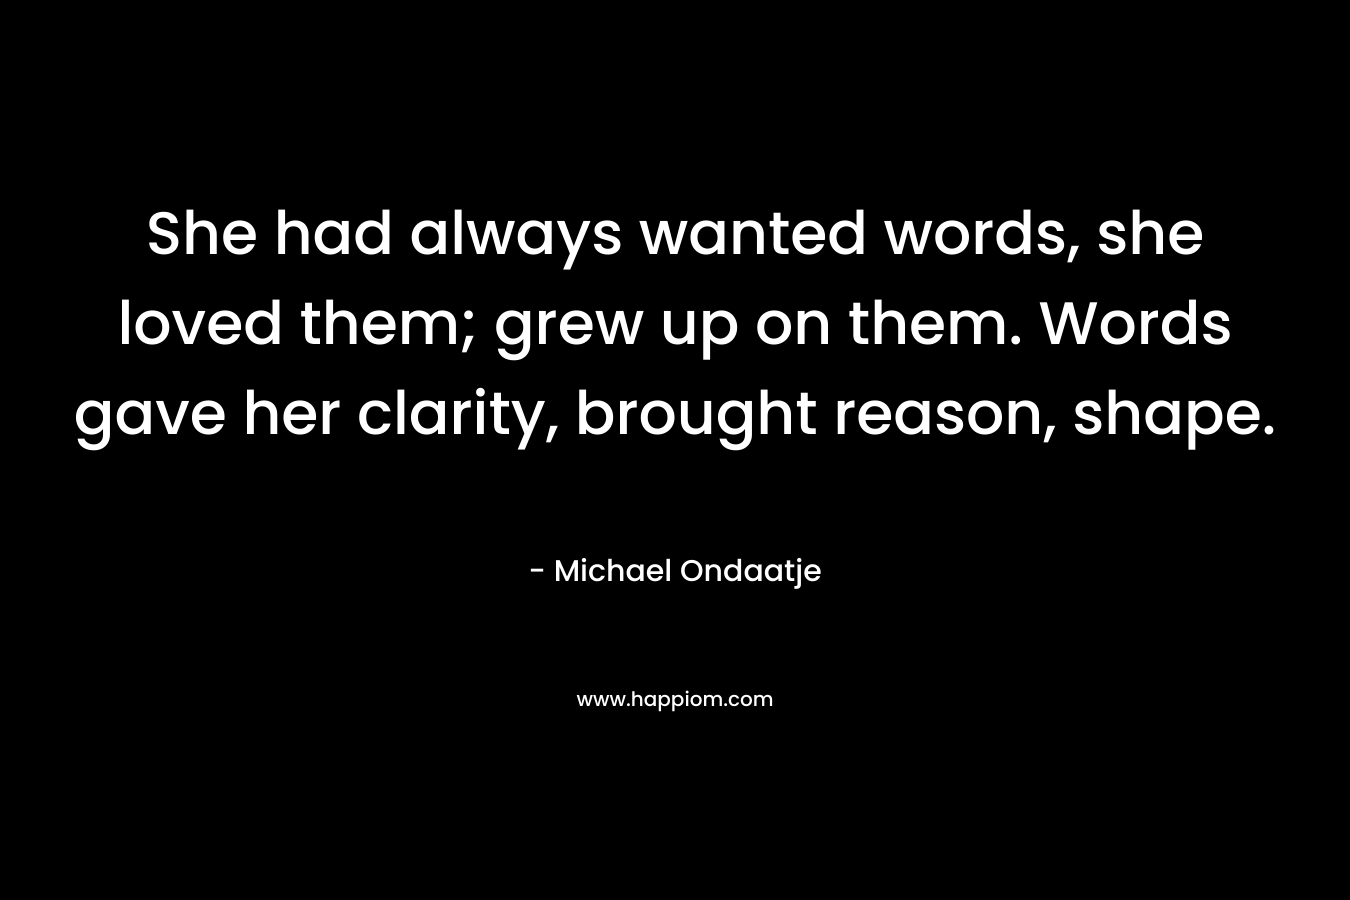 She had always wanted words, she loved them; grew up on them. Words gave her clarity, brought reason, shape. – Michael Ondaatje